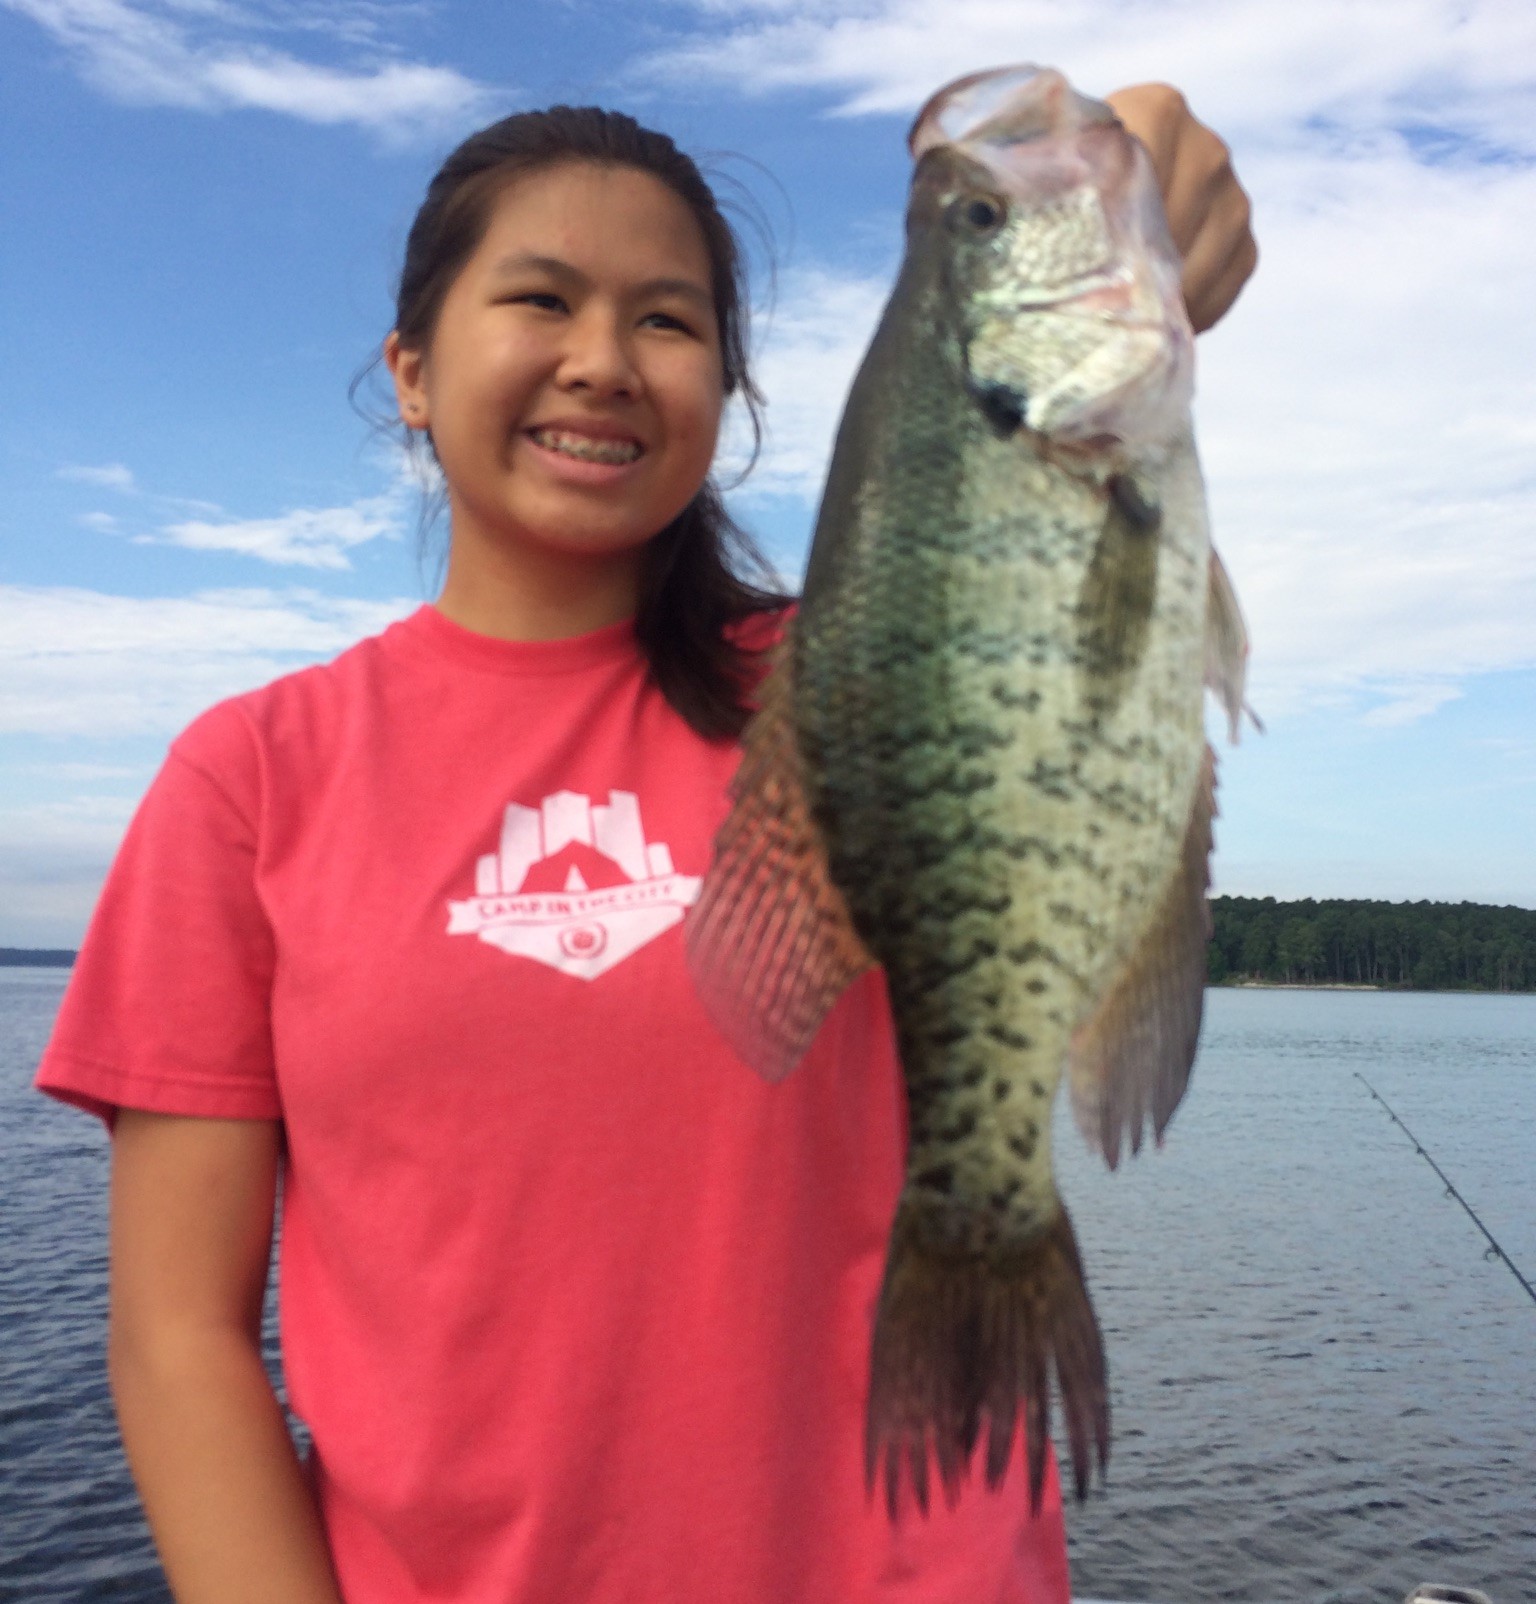 Kids Fishing, crappie guides on Toledo Bend